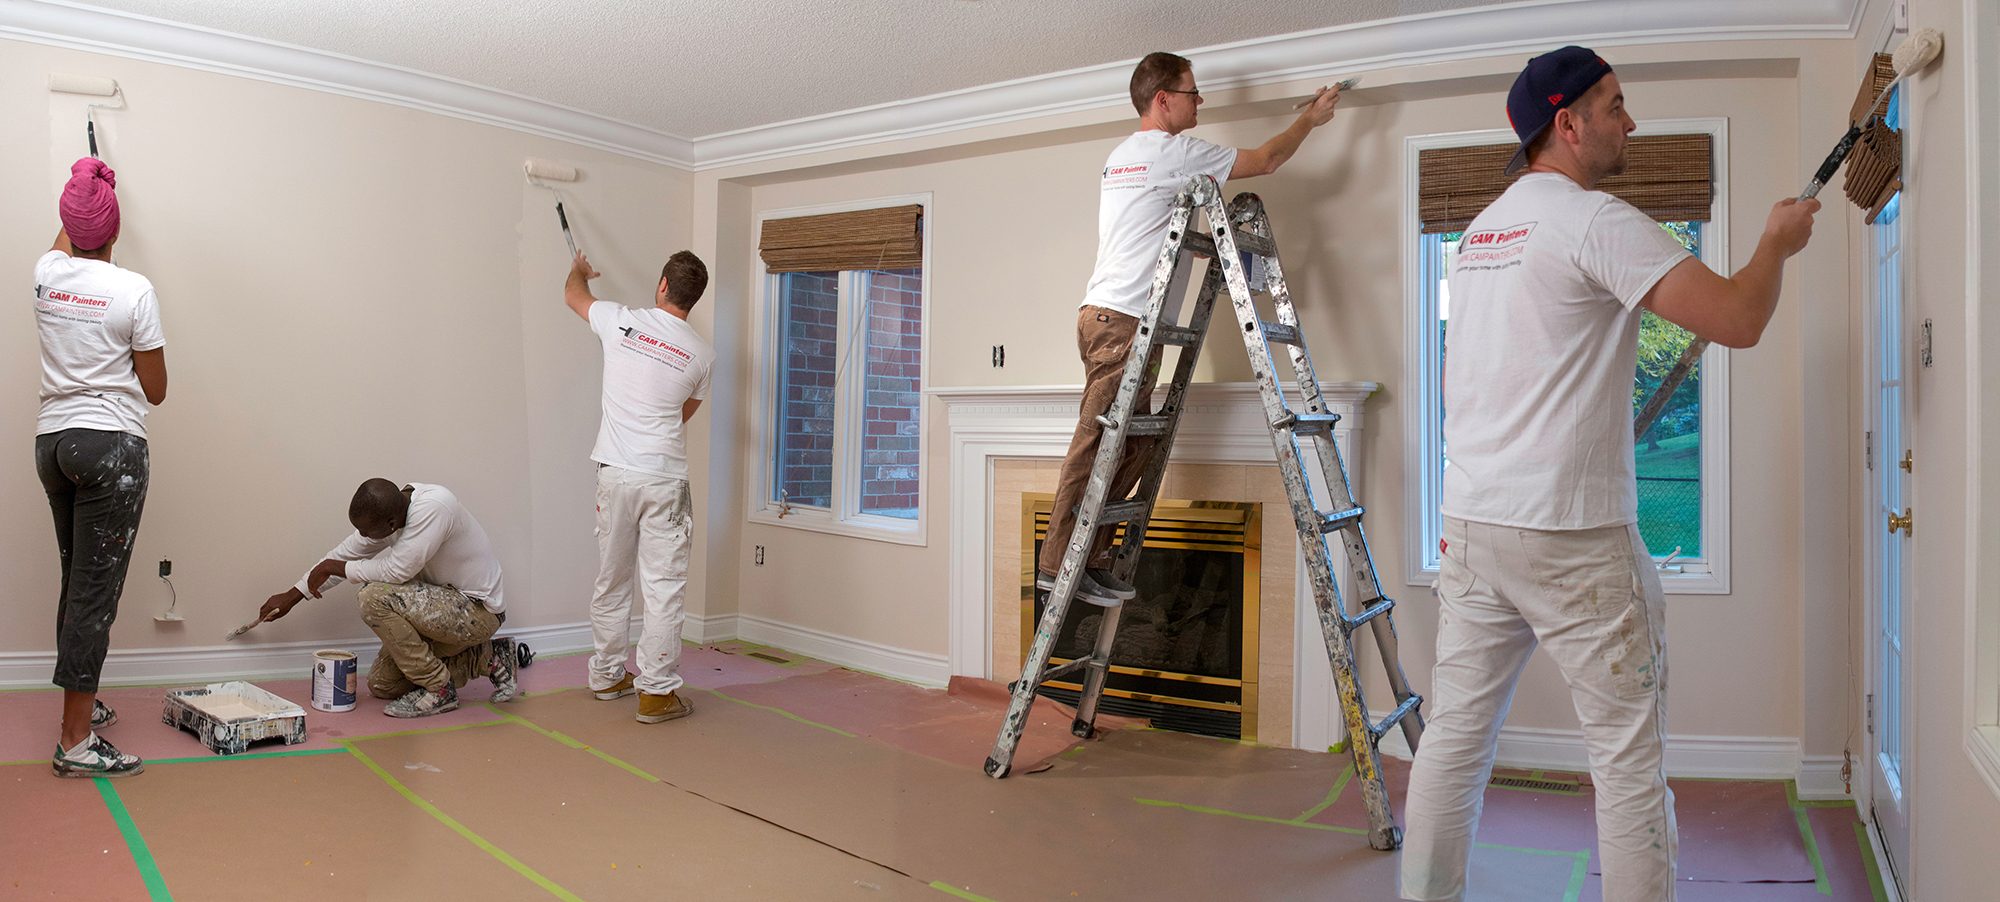 House Painters in Dallas